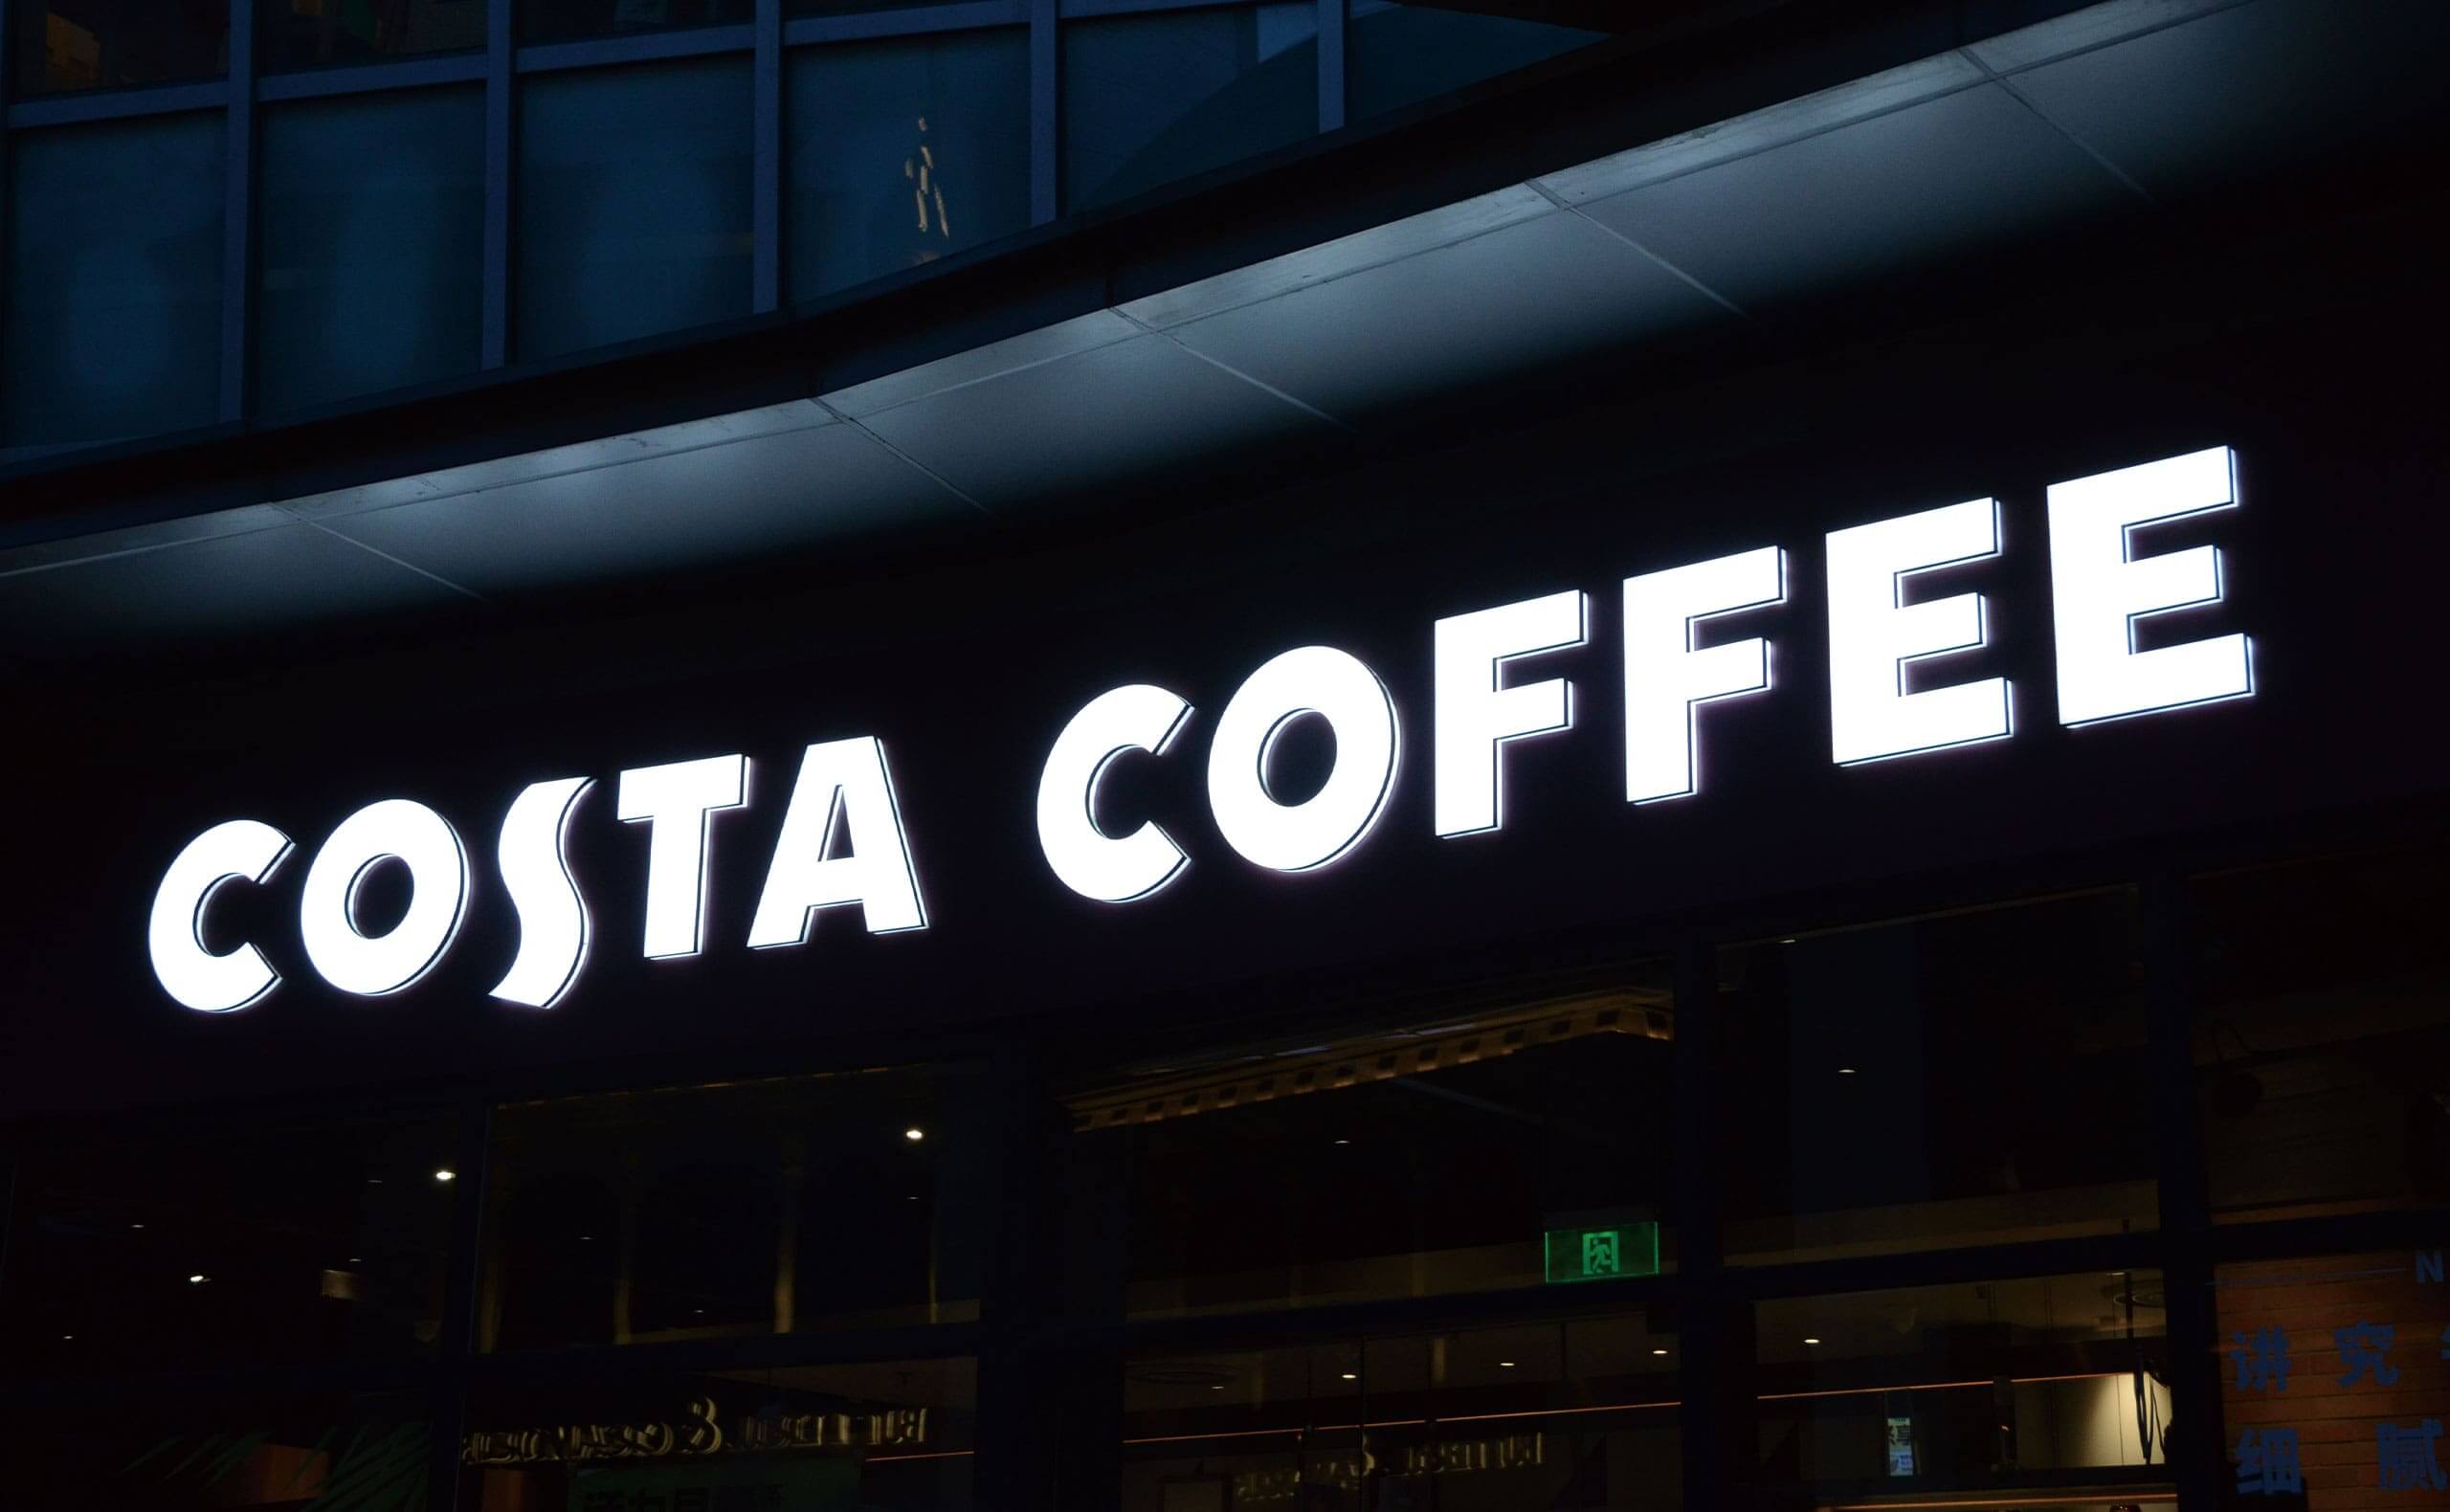 Front and Backlit Channel Letters for Costa Coffee